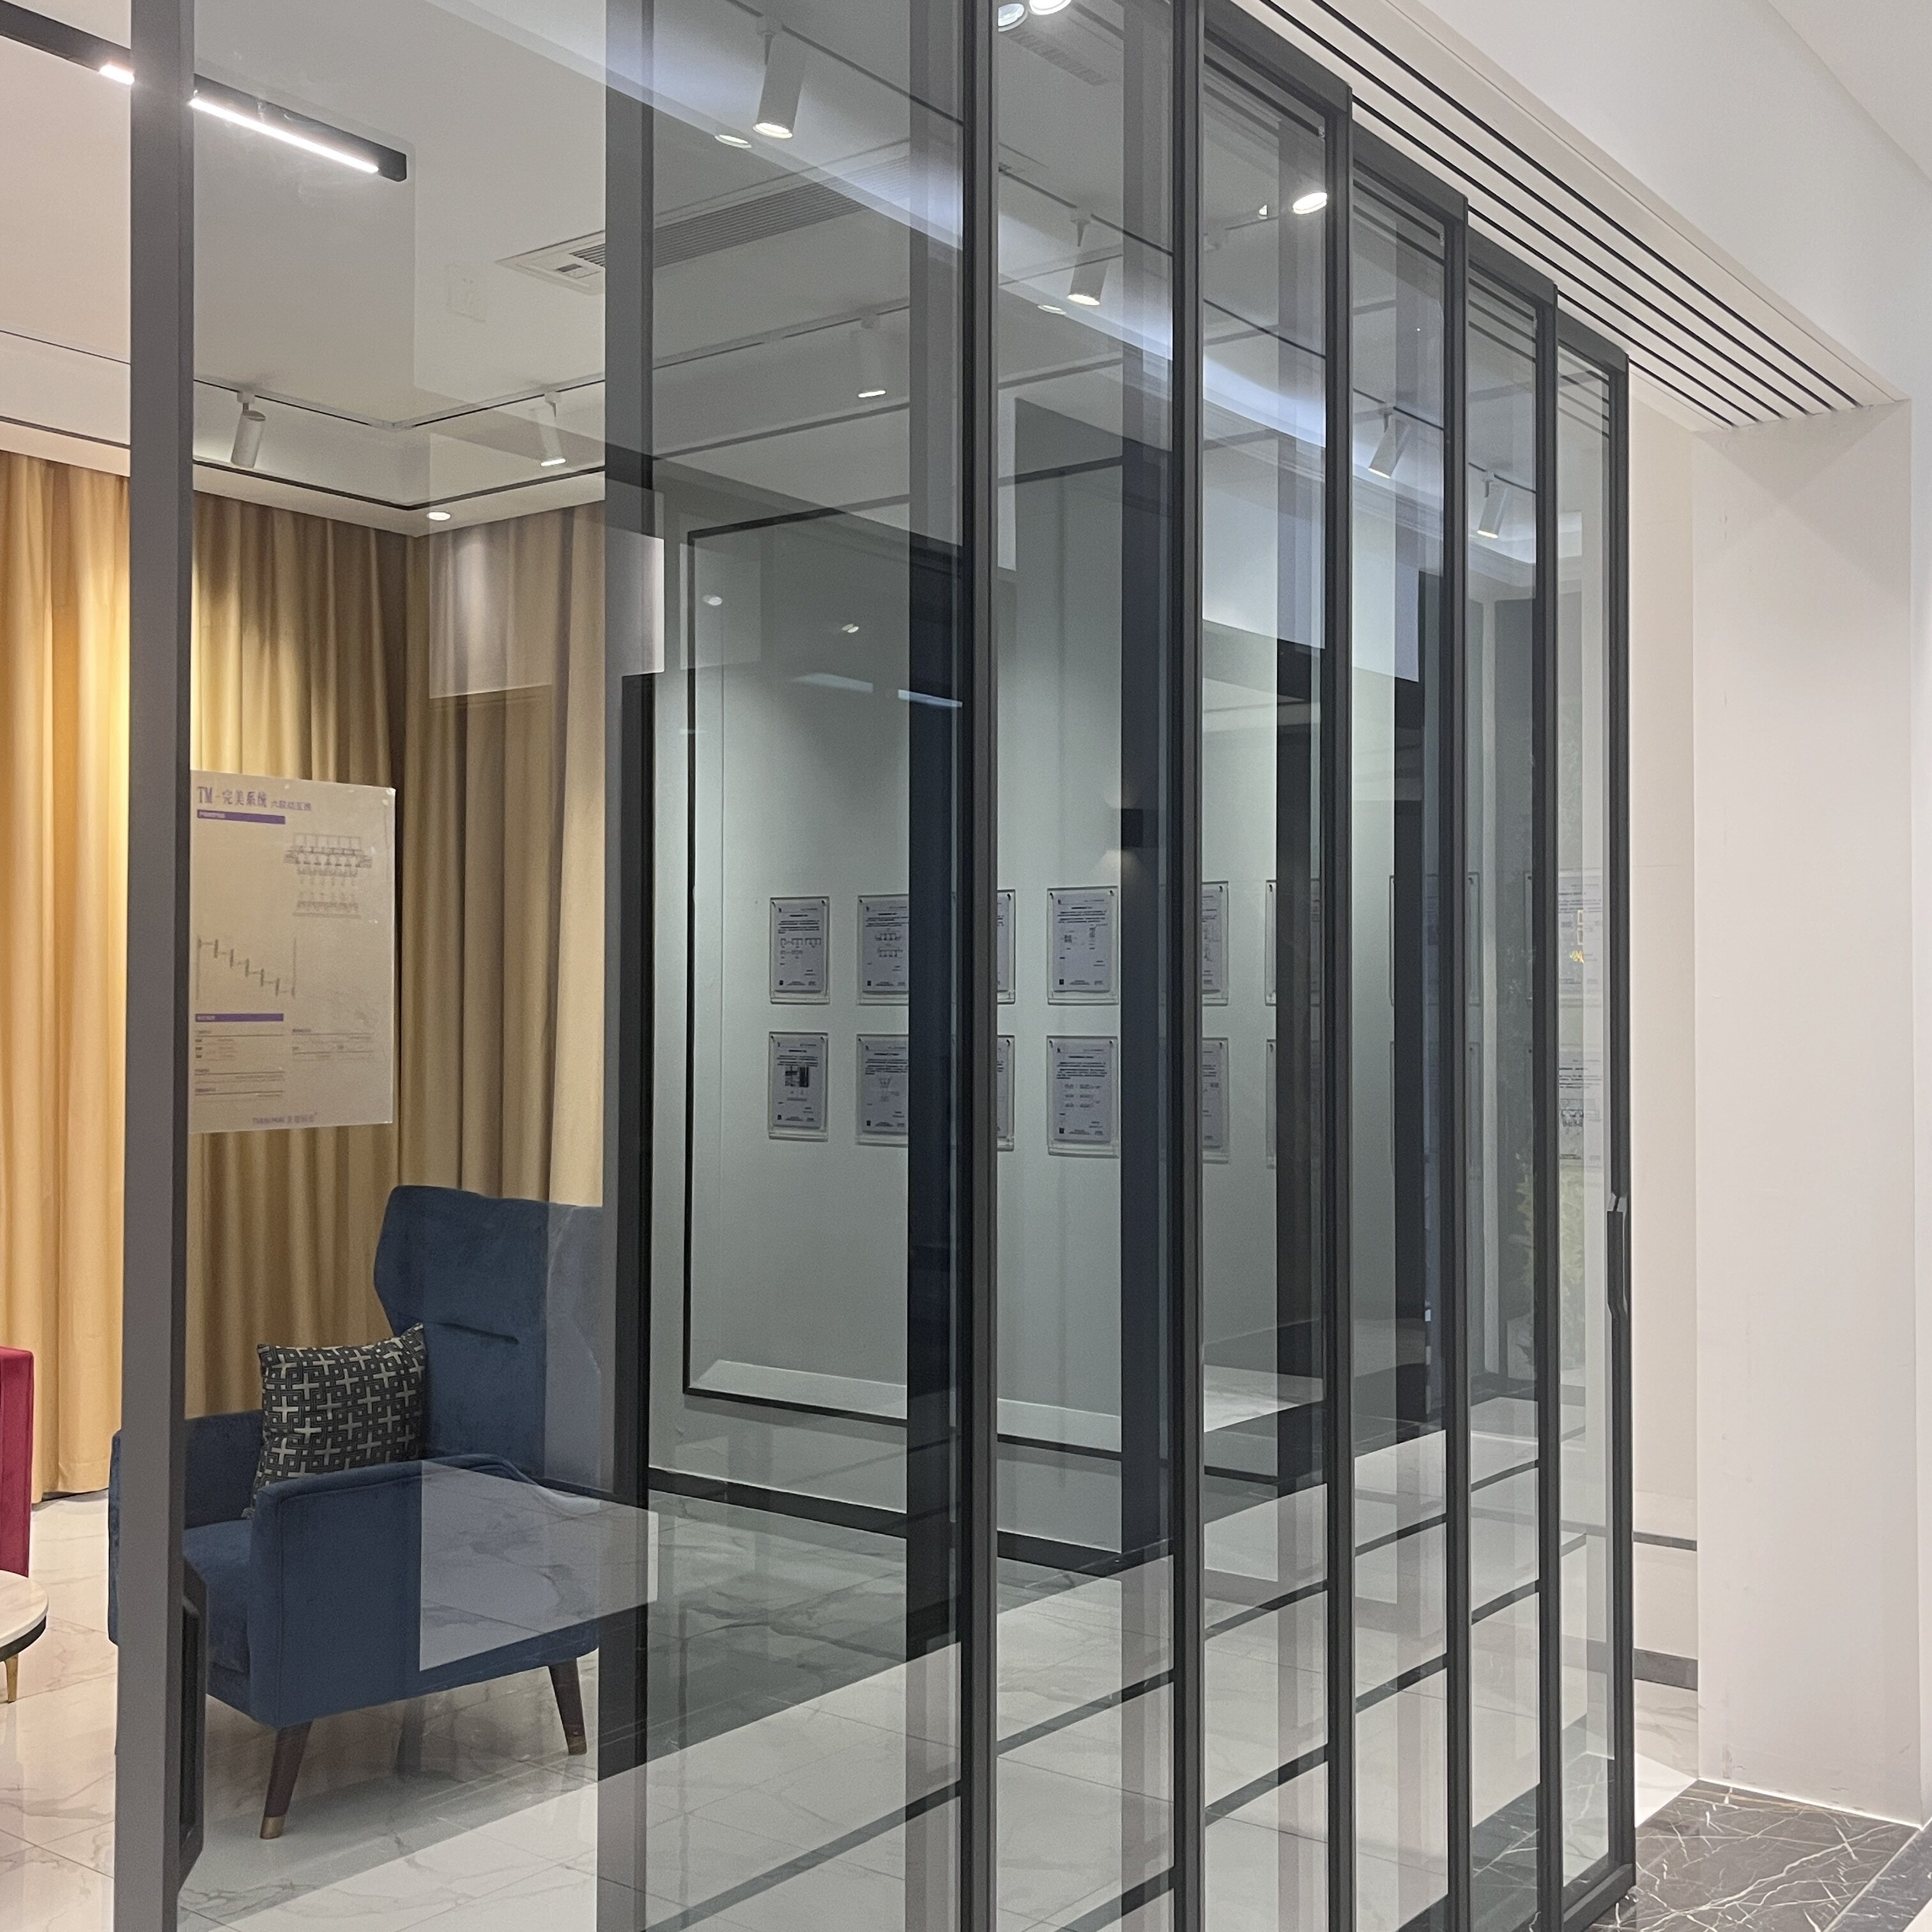 Perfect System Sliding Door Application uses an aluminum profile combination